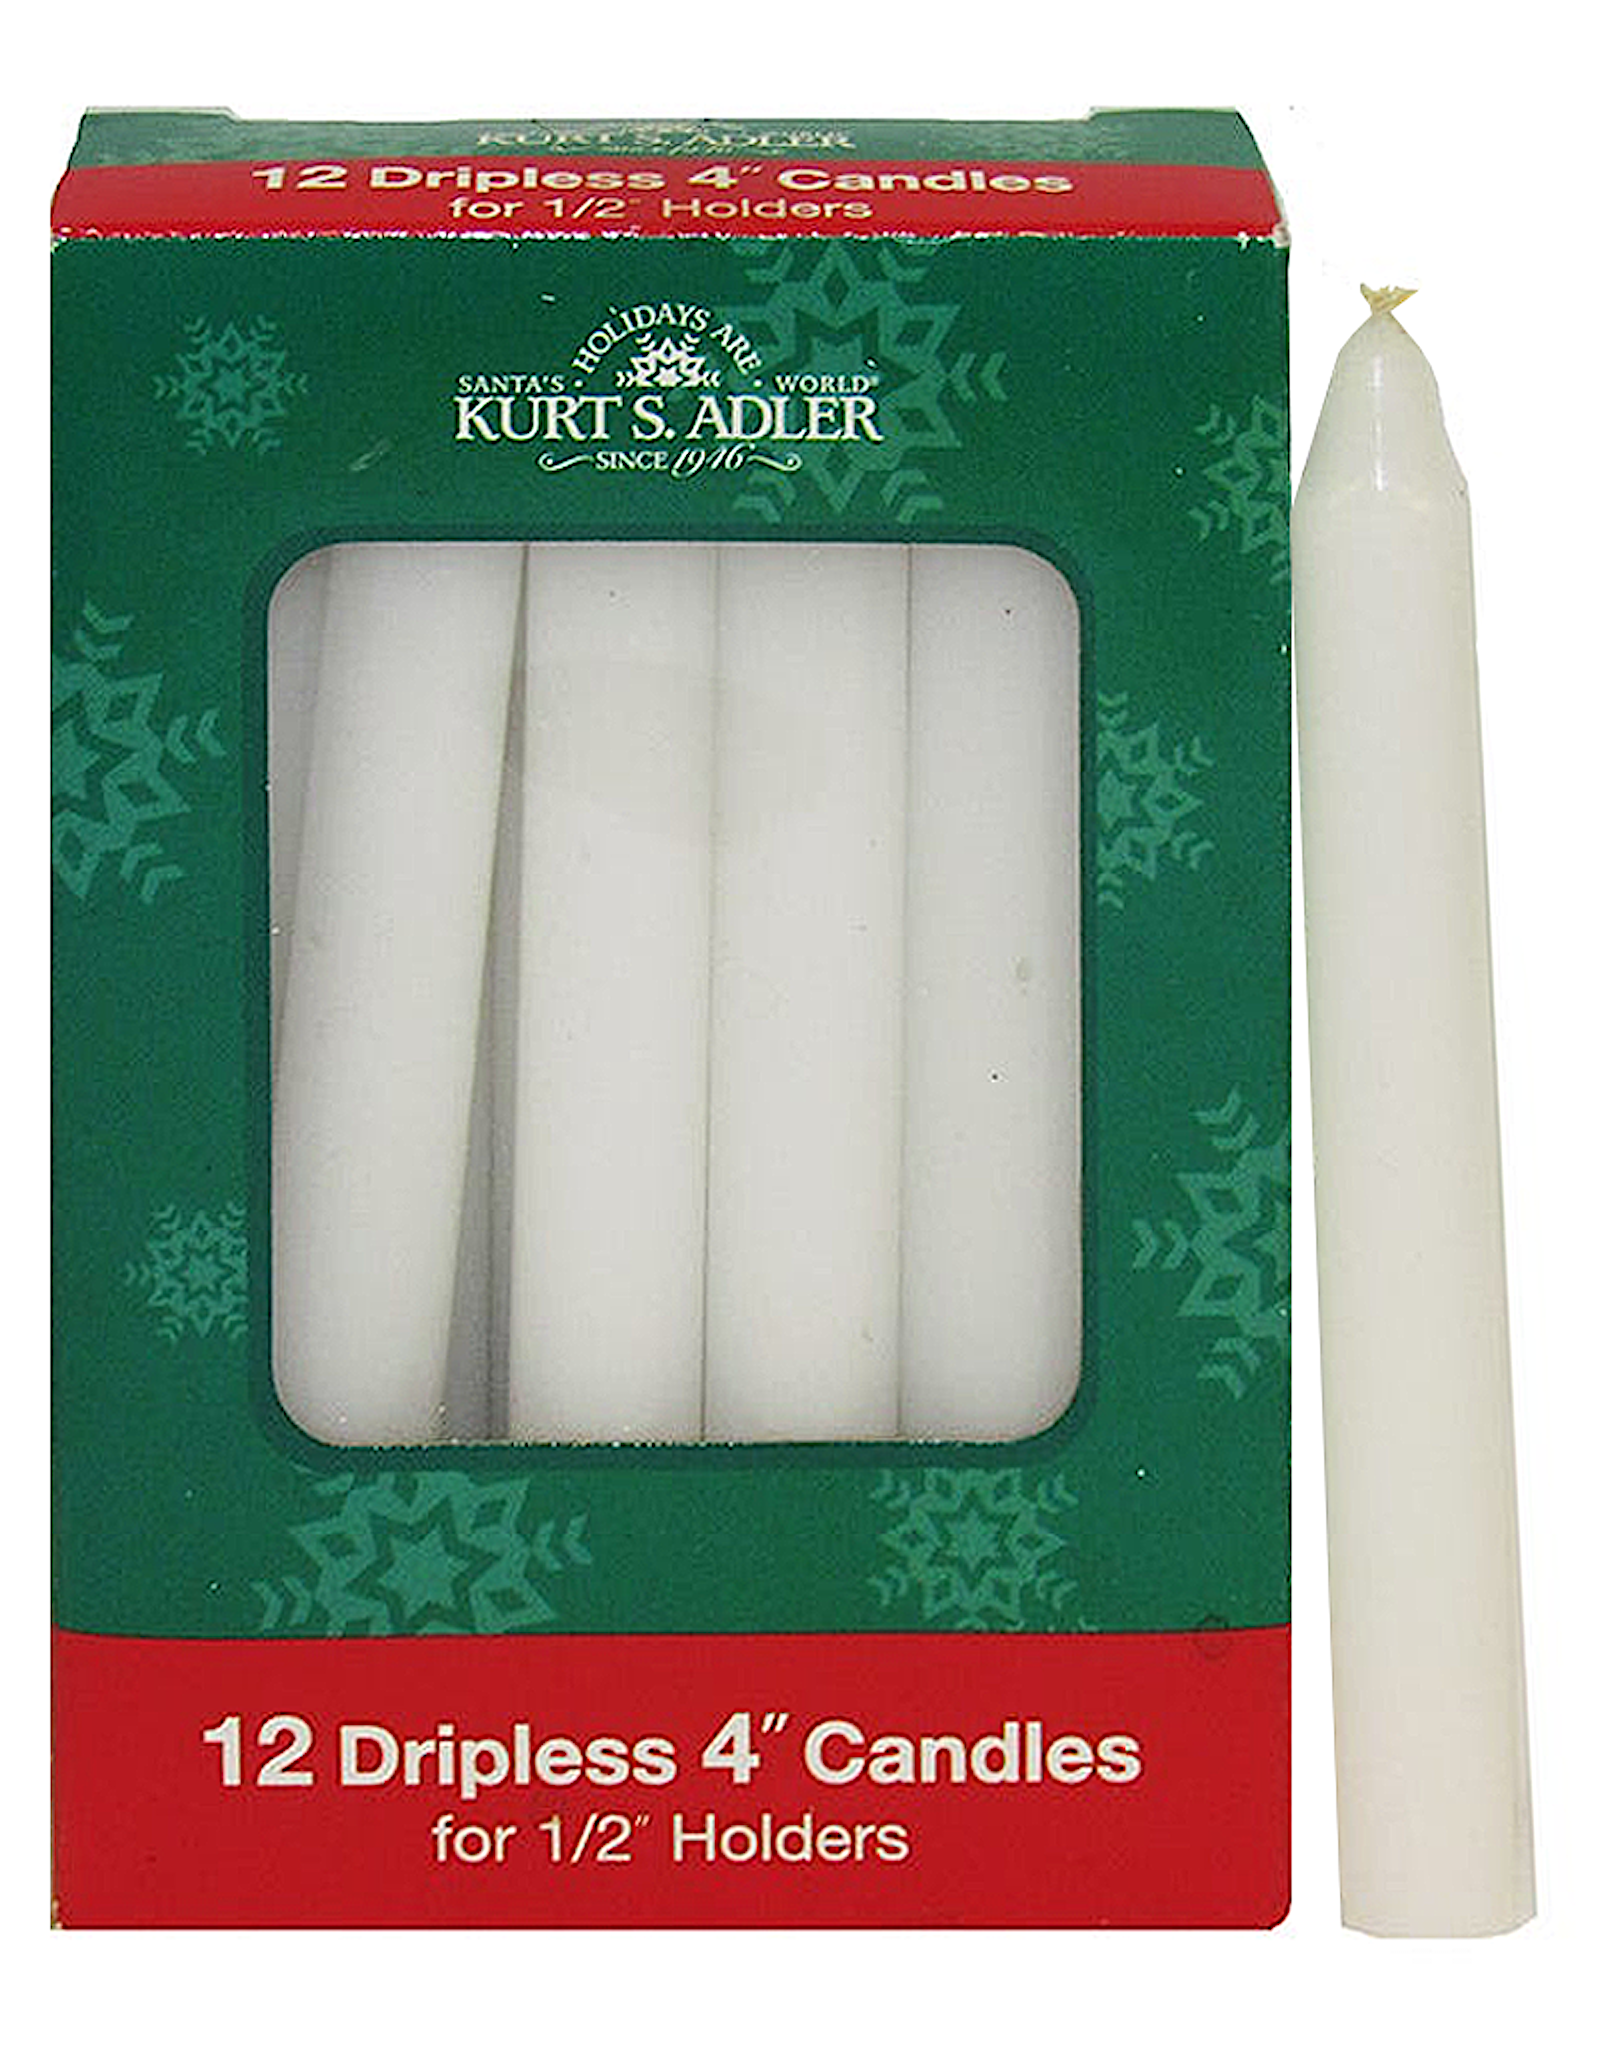 Kurt Adler Candles White Dripless Candle Set of 12 for 1/2 inch Holders